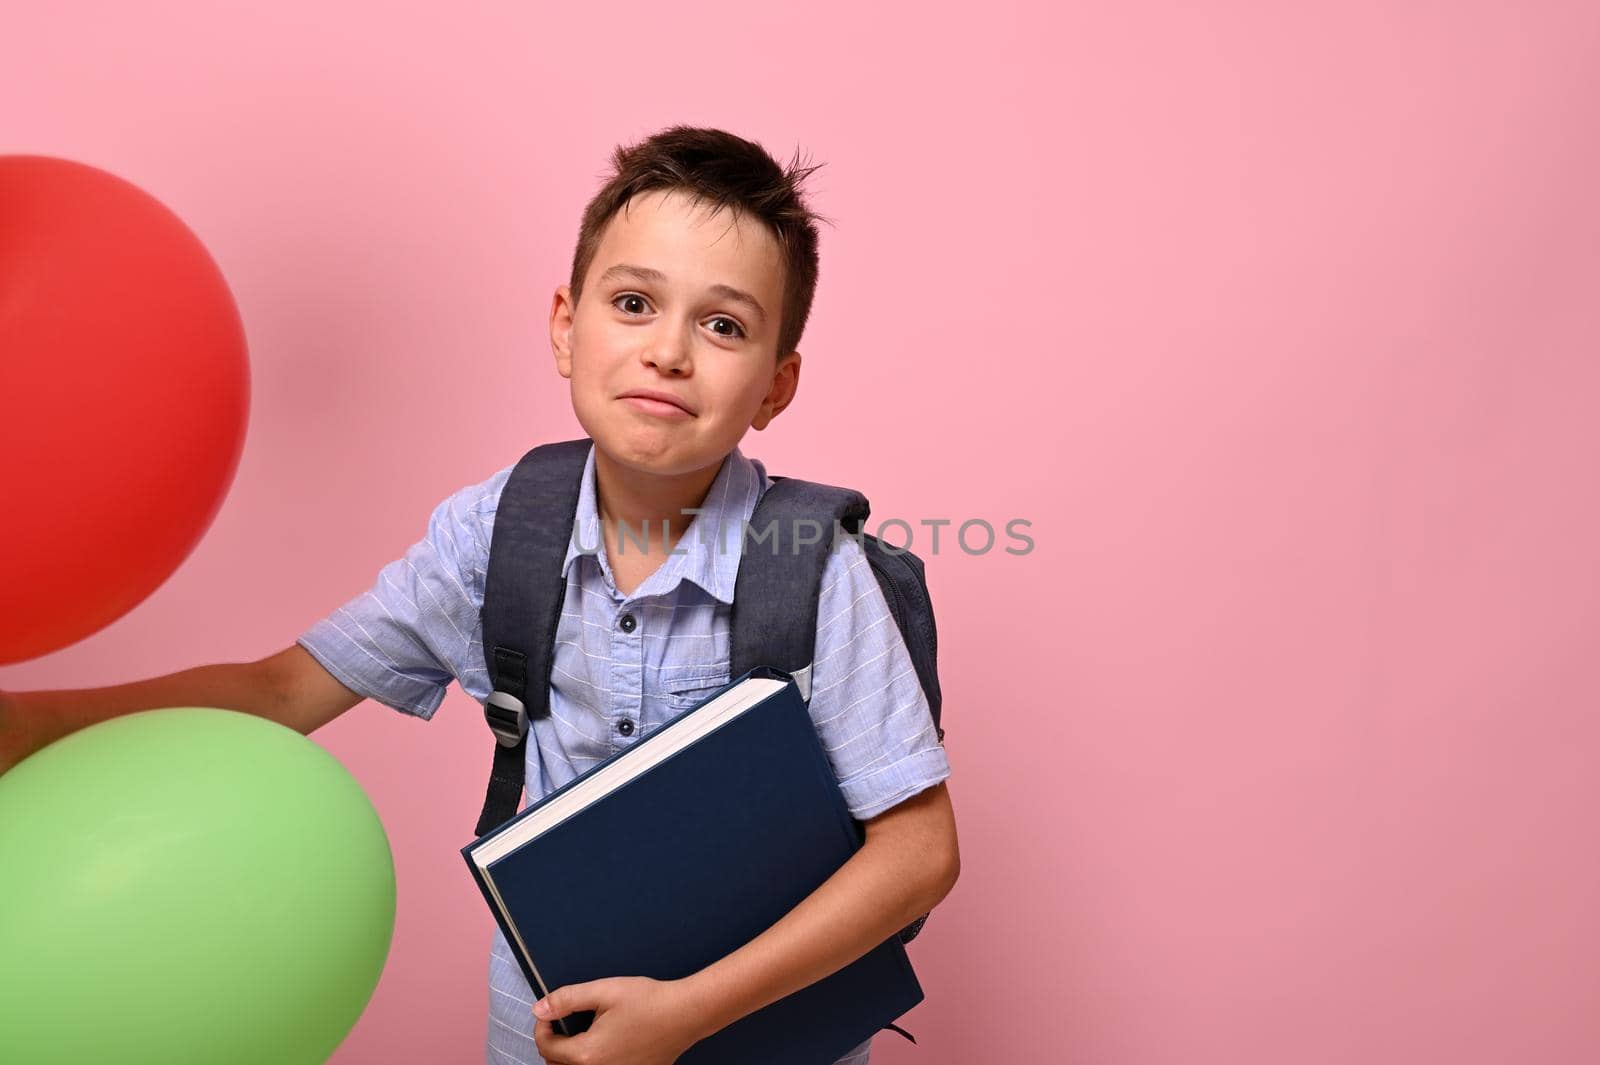 Concepts of happy back to school. Schoolboy with backpack holding book and multicolored balloons, cute smiling posing to camera over pink background with copy space by artgf